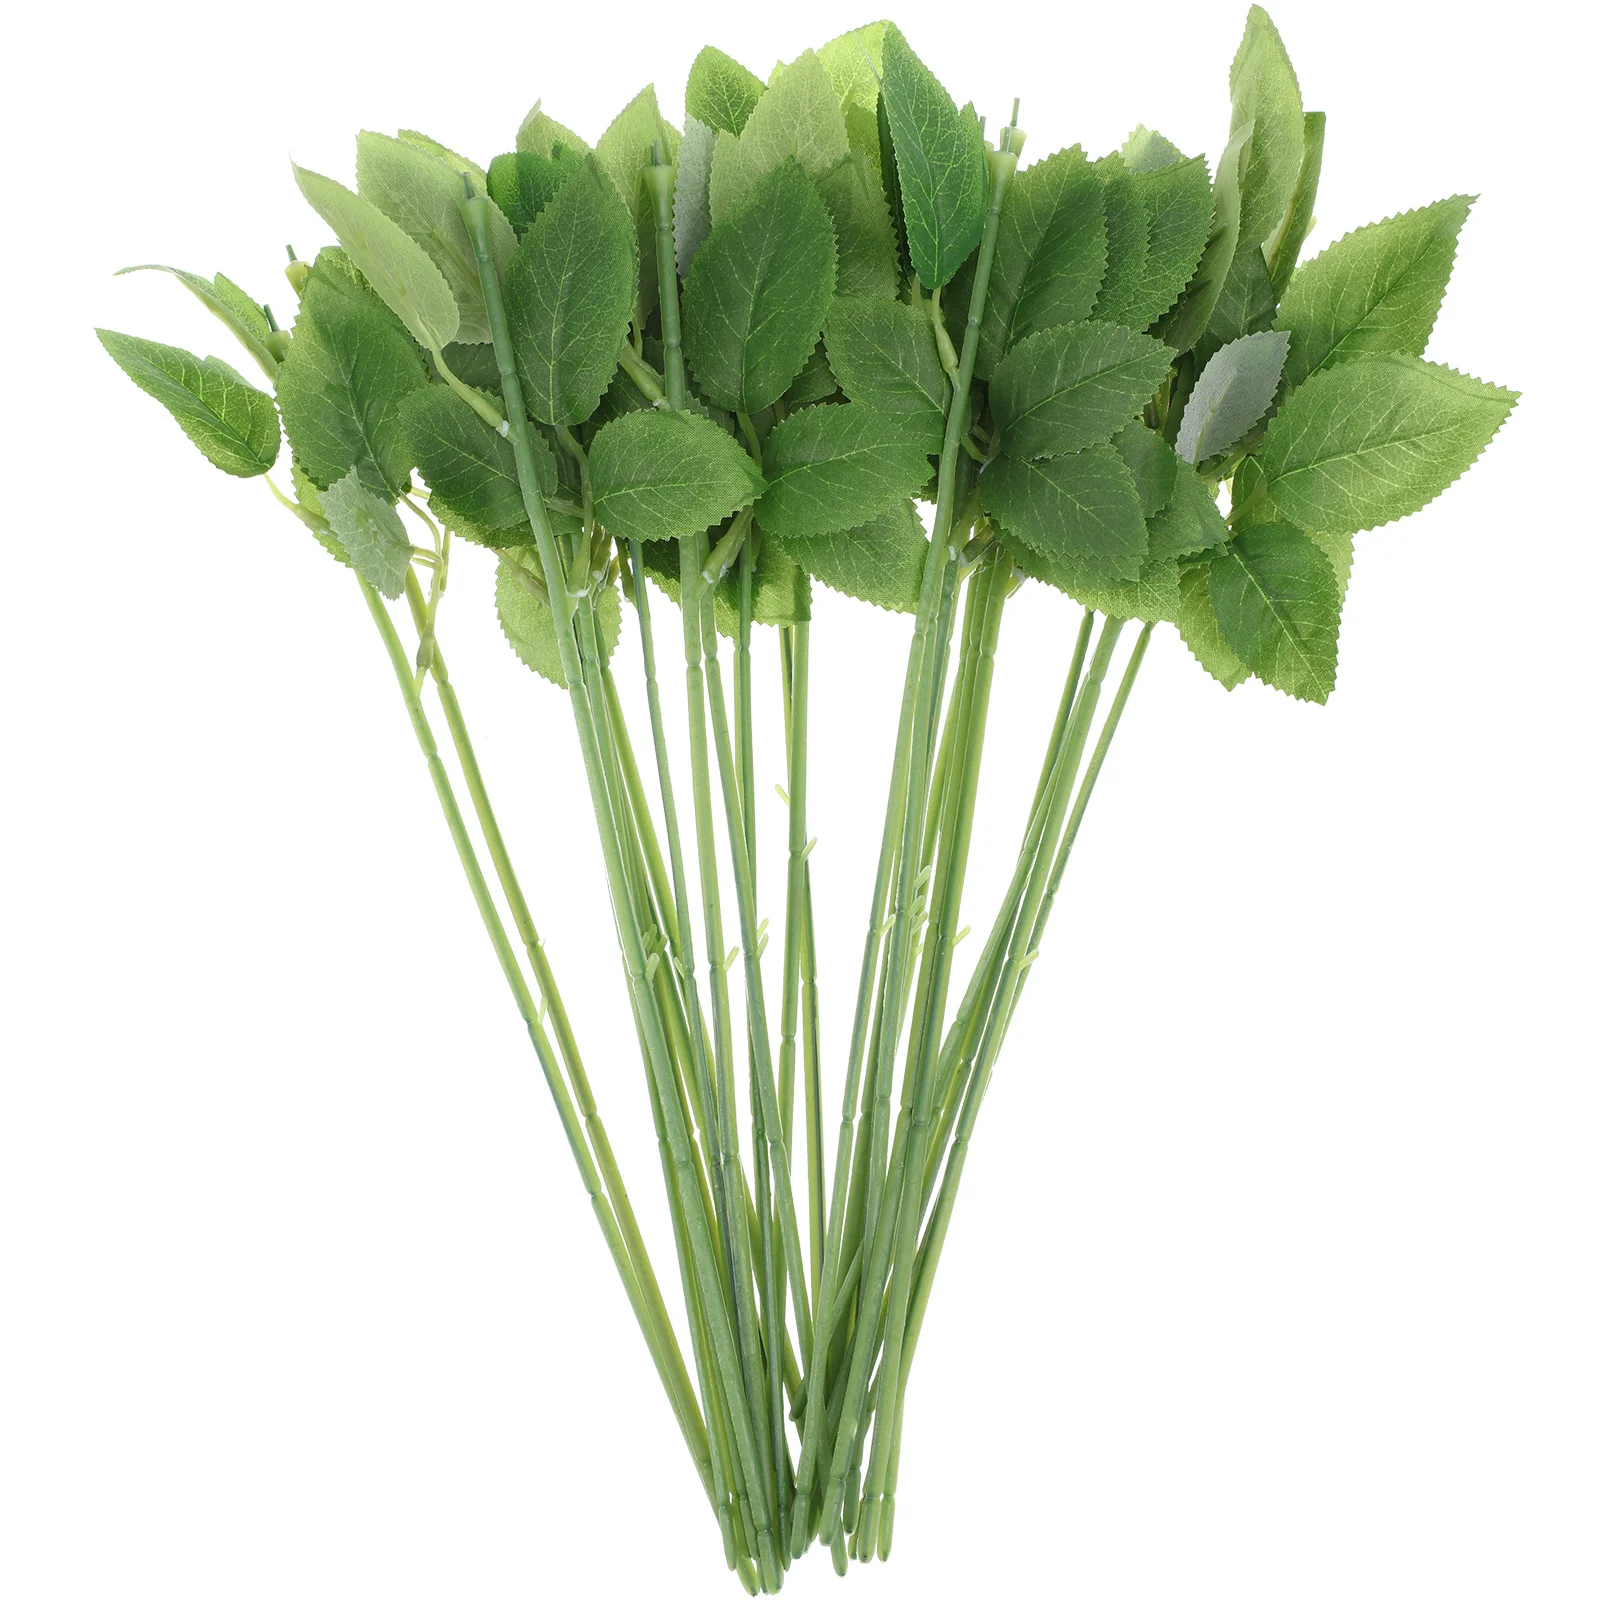 

30pcs Floral Stem with Leaves Wire DIY Bouquet Stem Wrapping for Bouquets Weddings Wreaths Flower Crafts